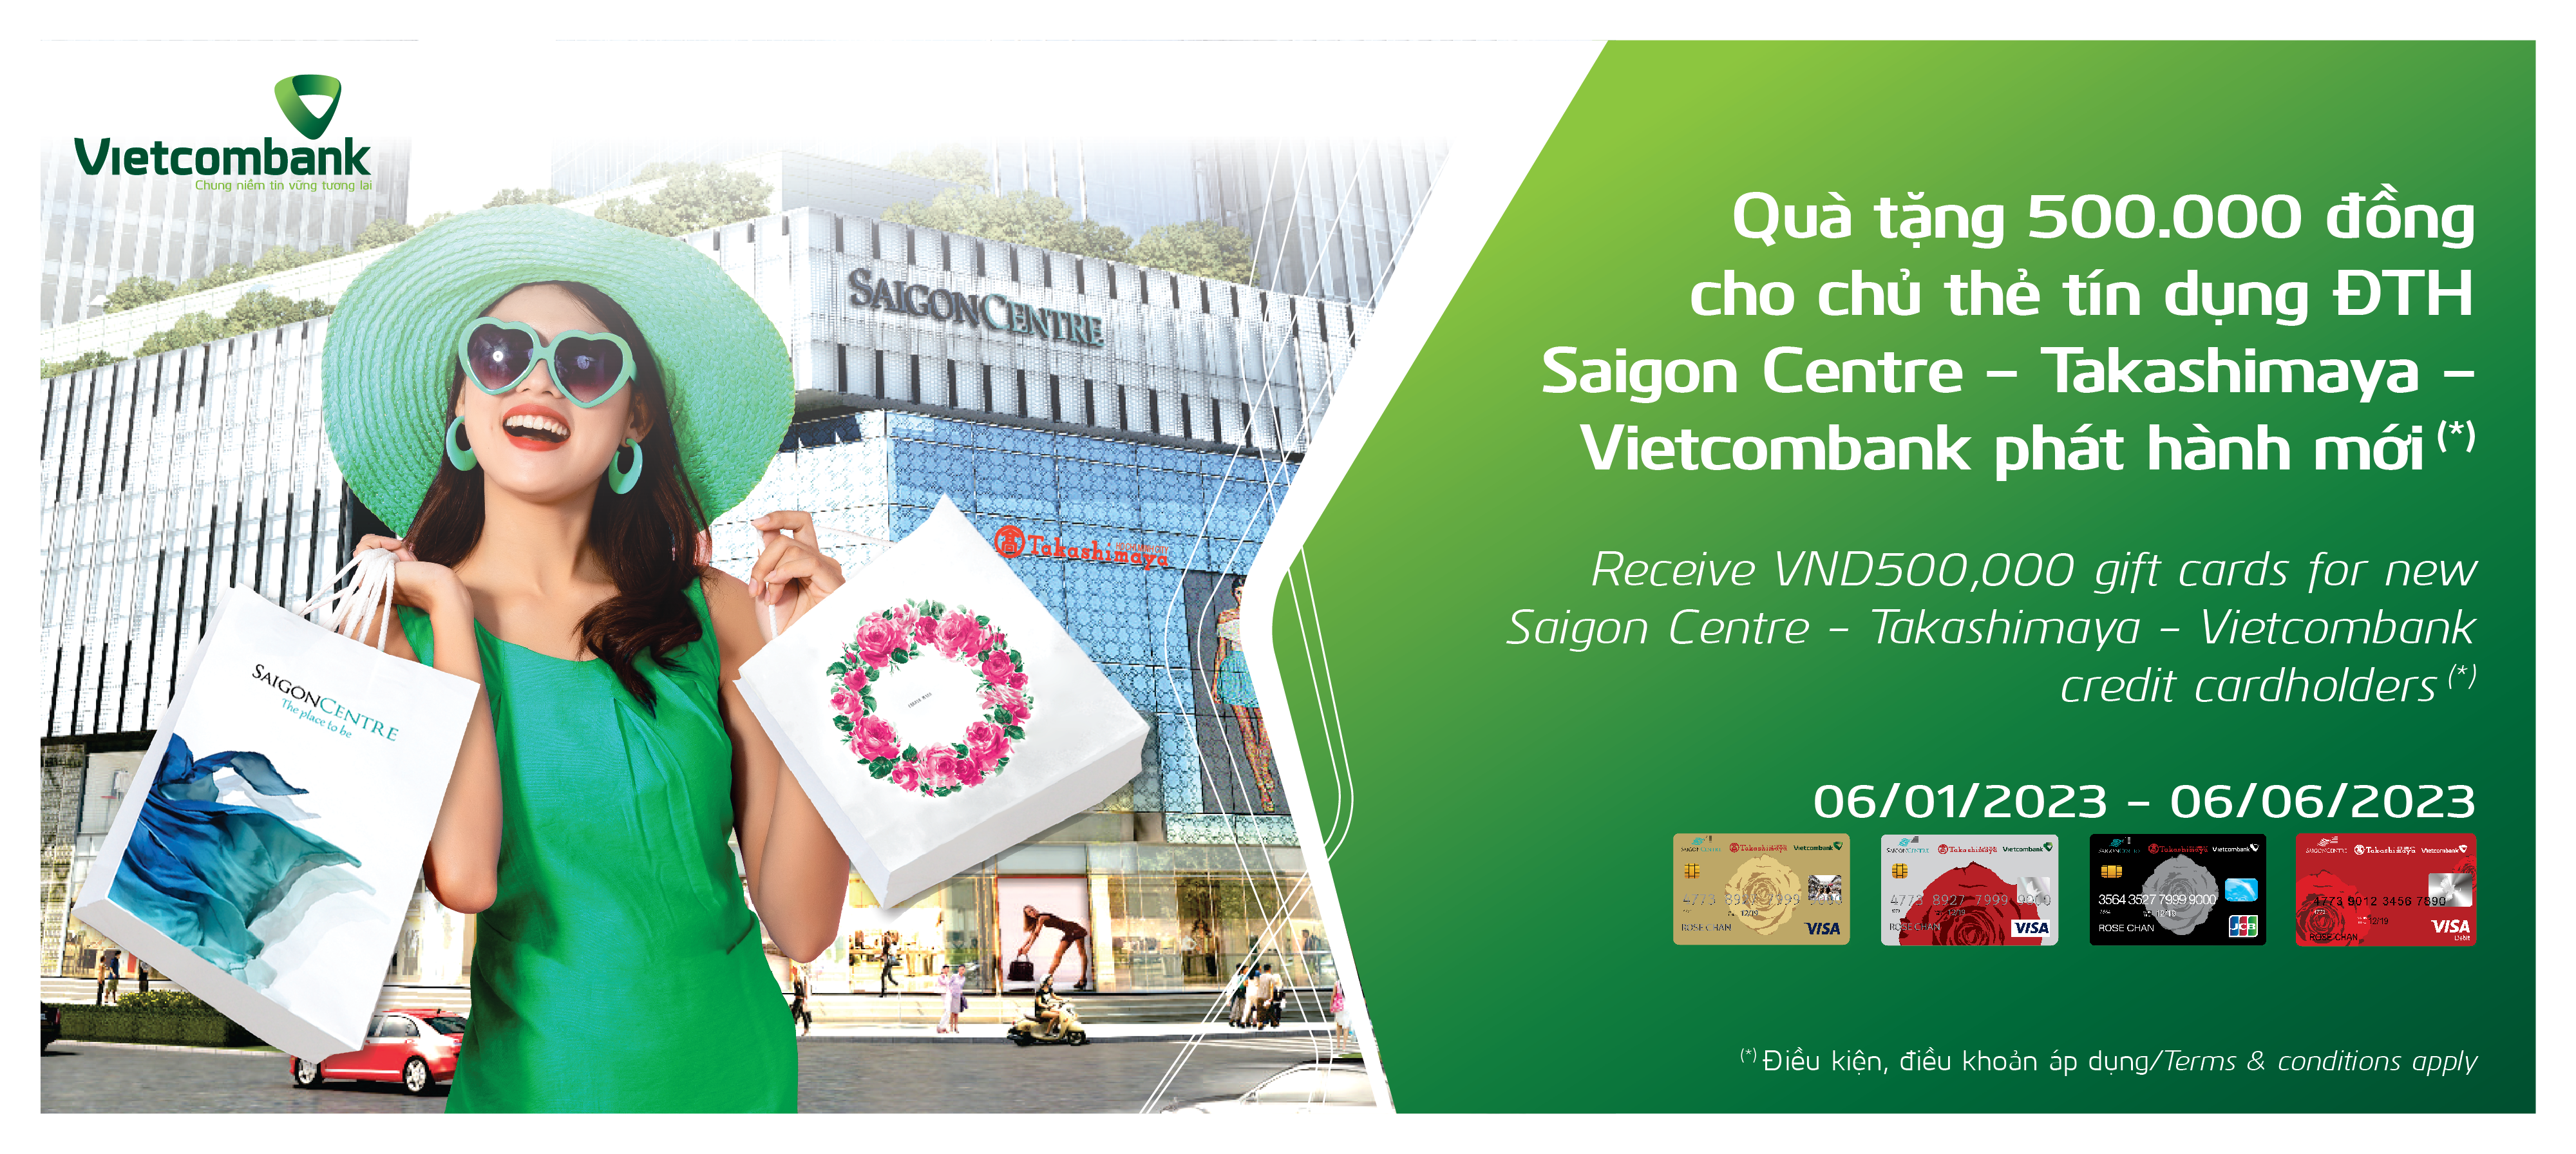 RECEIVE VND 500K GIFT CARDS FOR NEW CO-BRANDED CARD HOLDERS